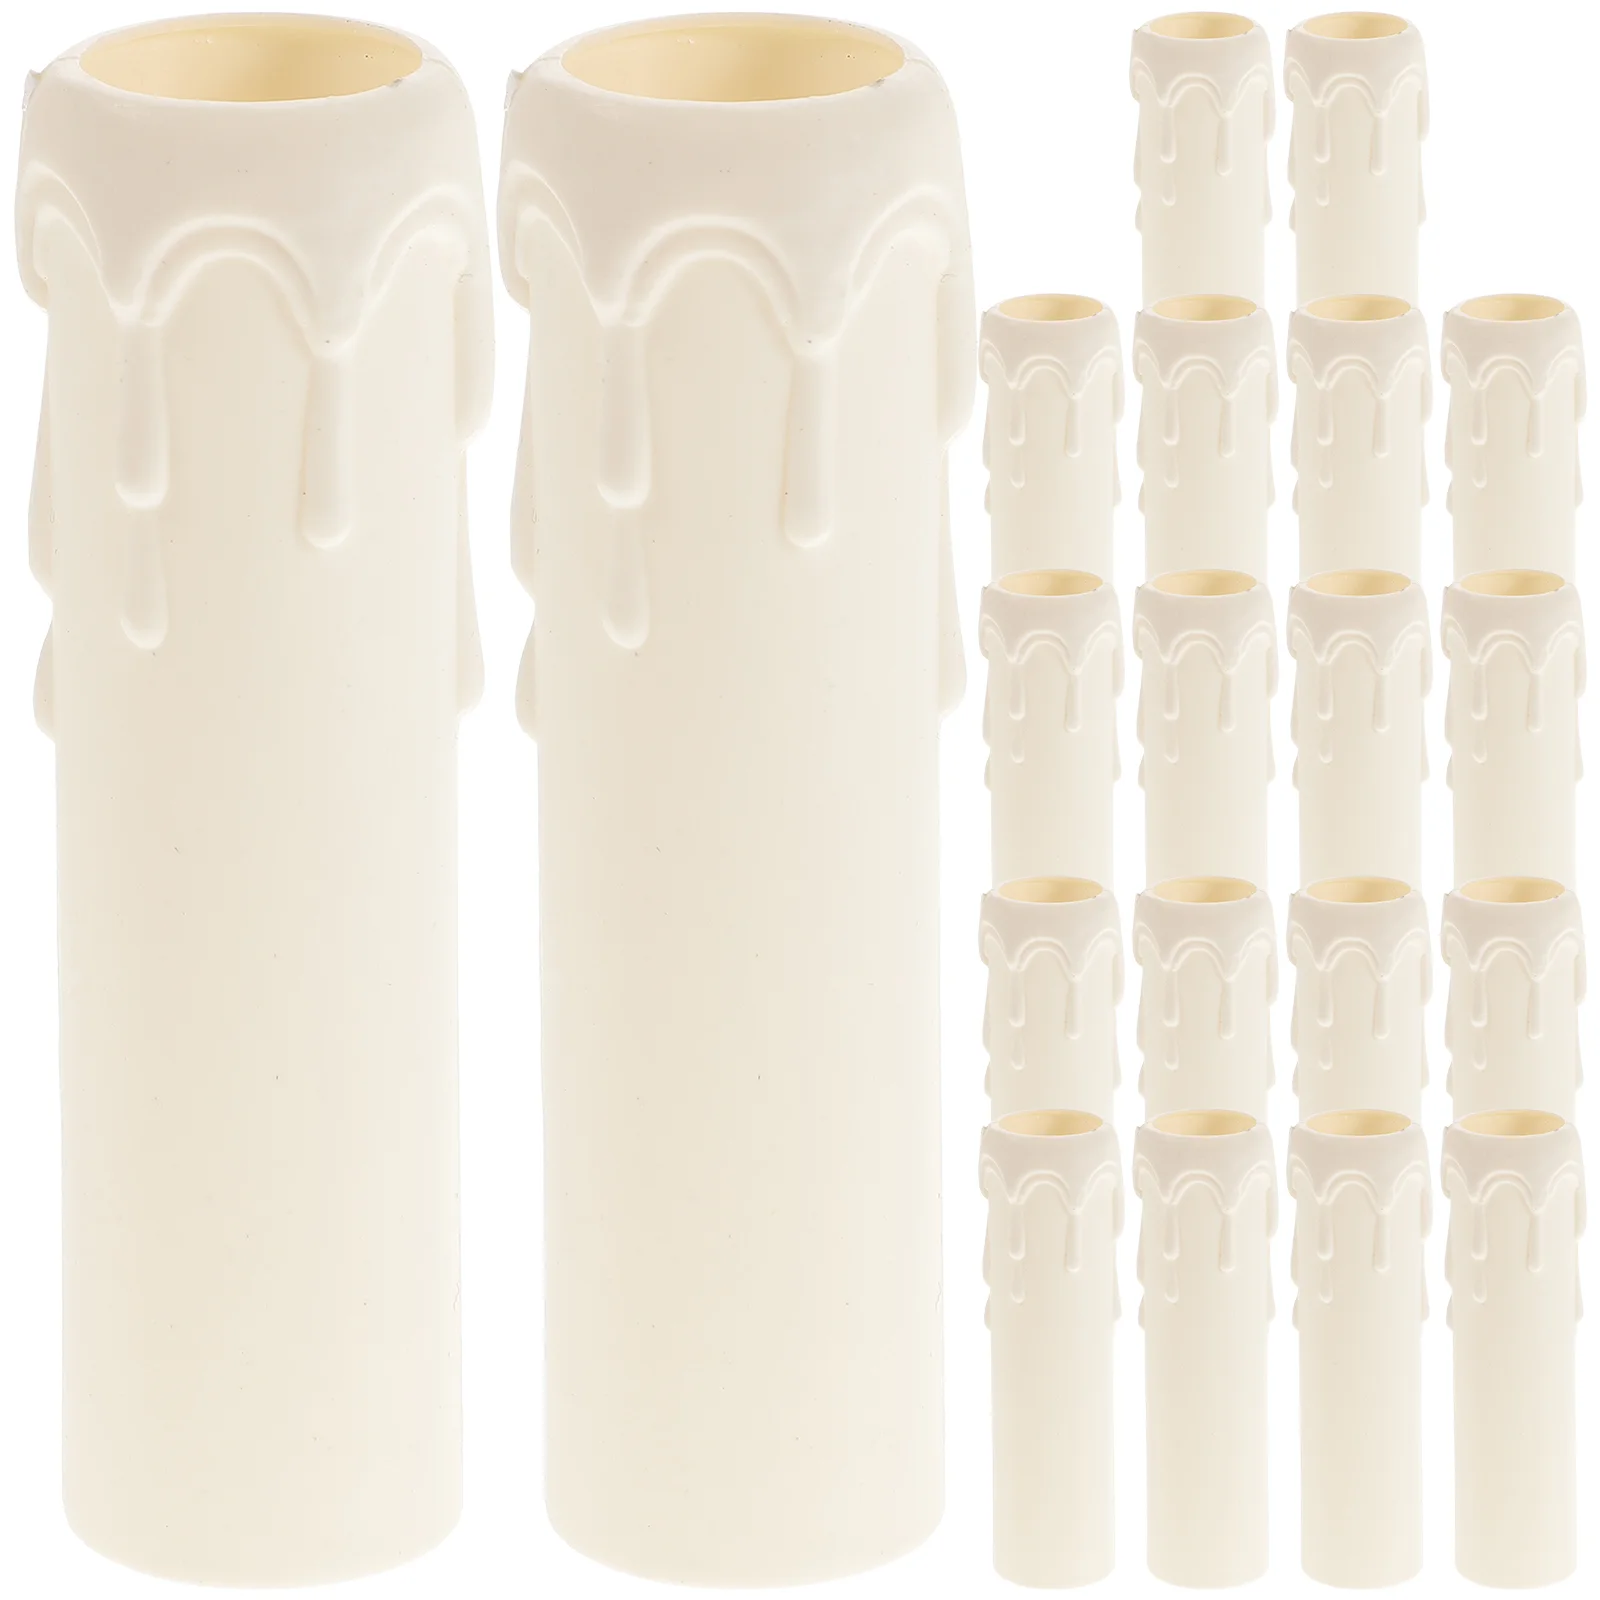 20 Pcs Tears Sleeves Socket Tubes Chandelier Covers Durable Casings Ceiling Decor Plastic Holders Tubular Creative card cover id protection booklet transparent protective plastic certificate display game picture holder protector sleeves